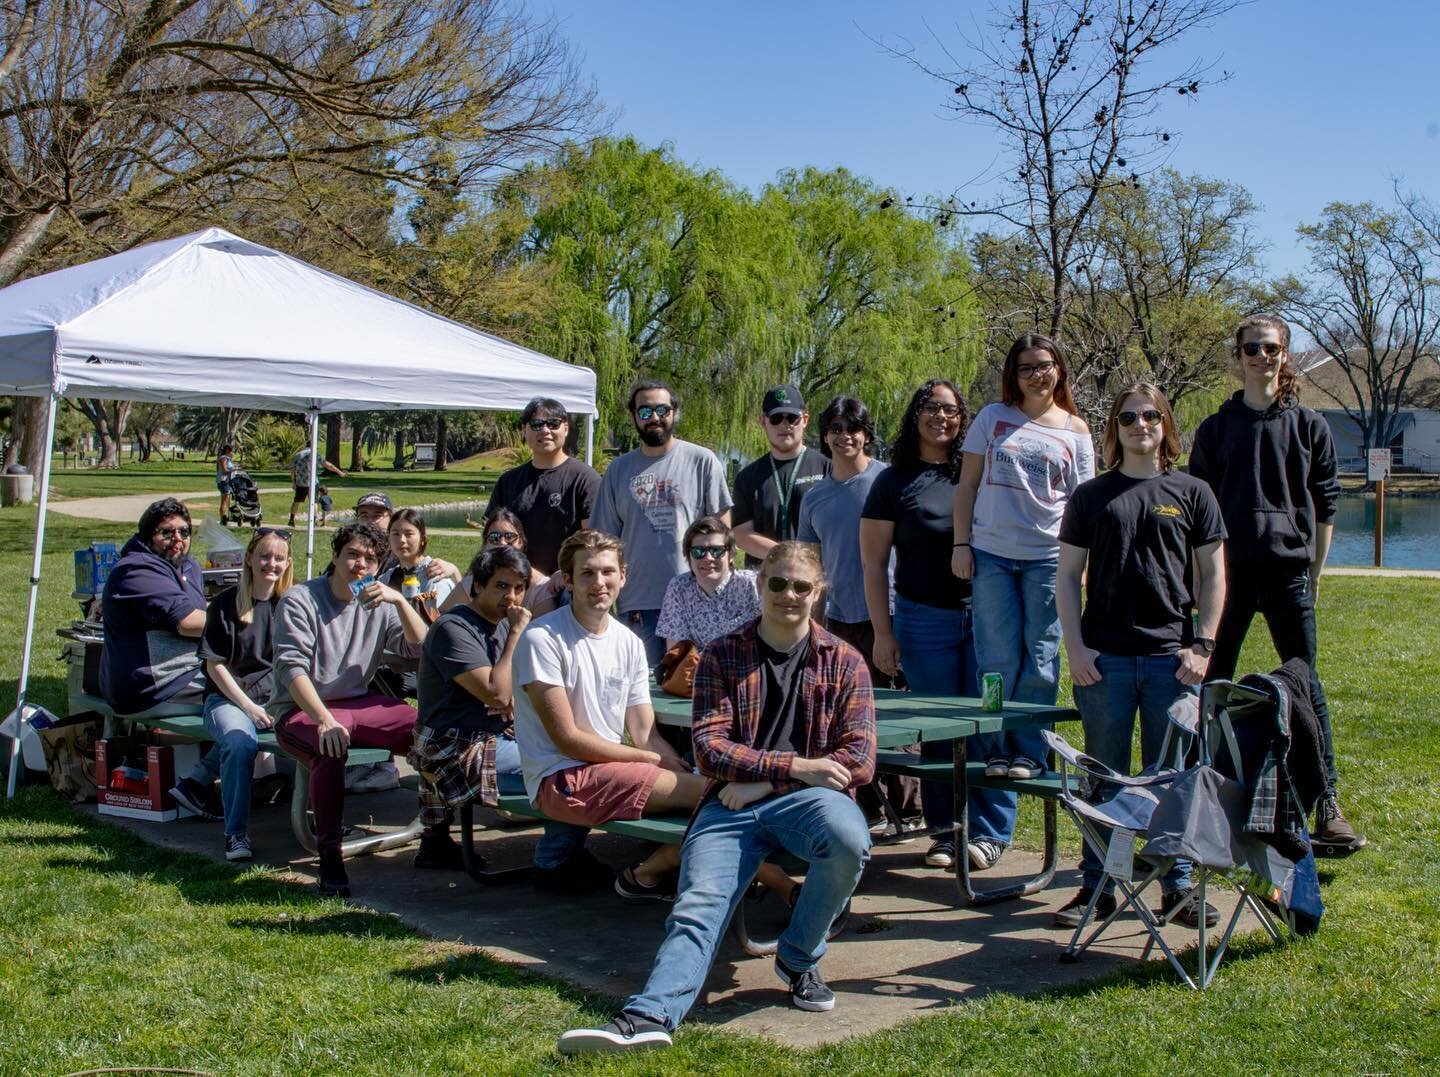 To celebrate the completion of our frame and the start of the non-stop work week, we threw a barbecue at a local park! Thank you to everyone who could make it and for making it an enjoyable experience.

@redlineoil 

#sacramento #california #sacstate